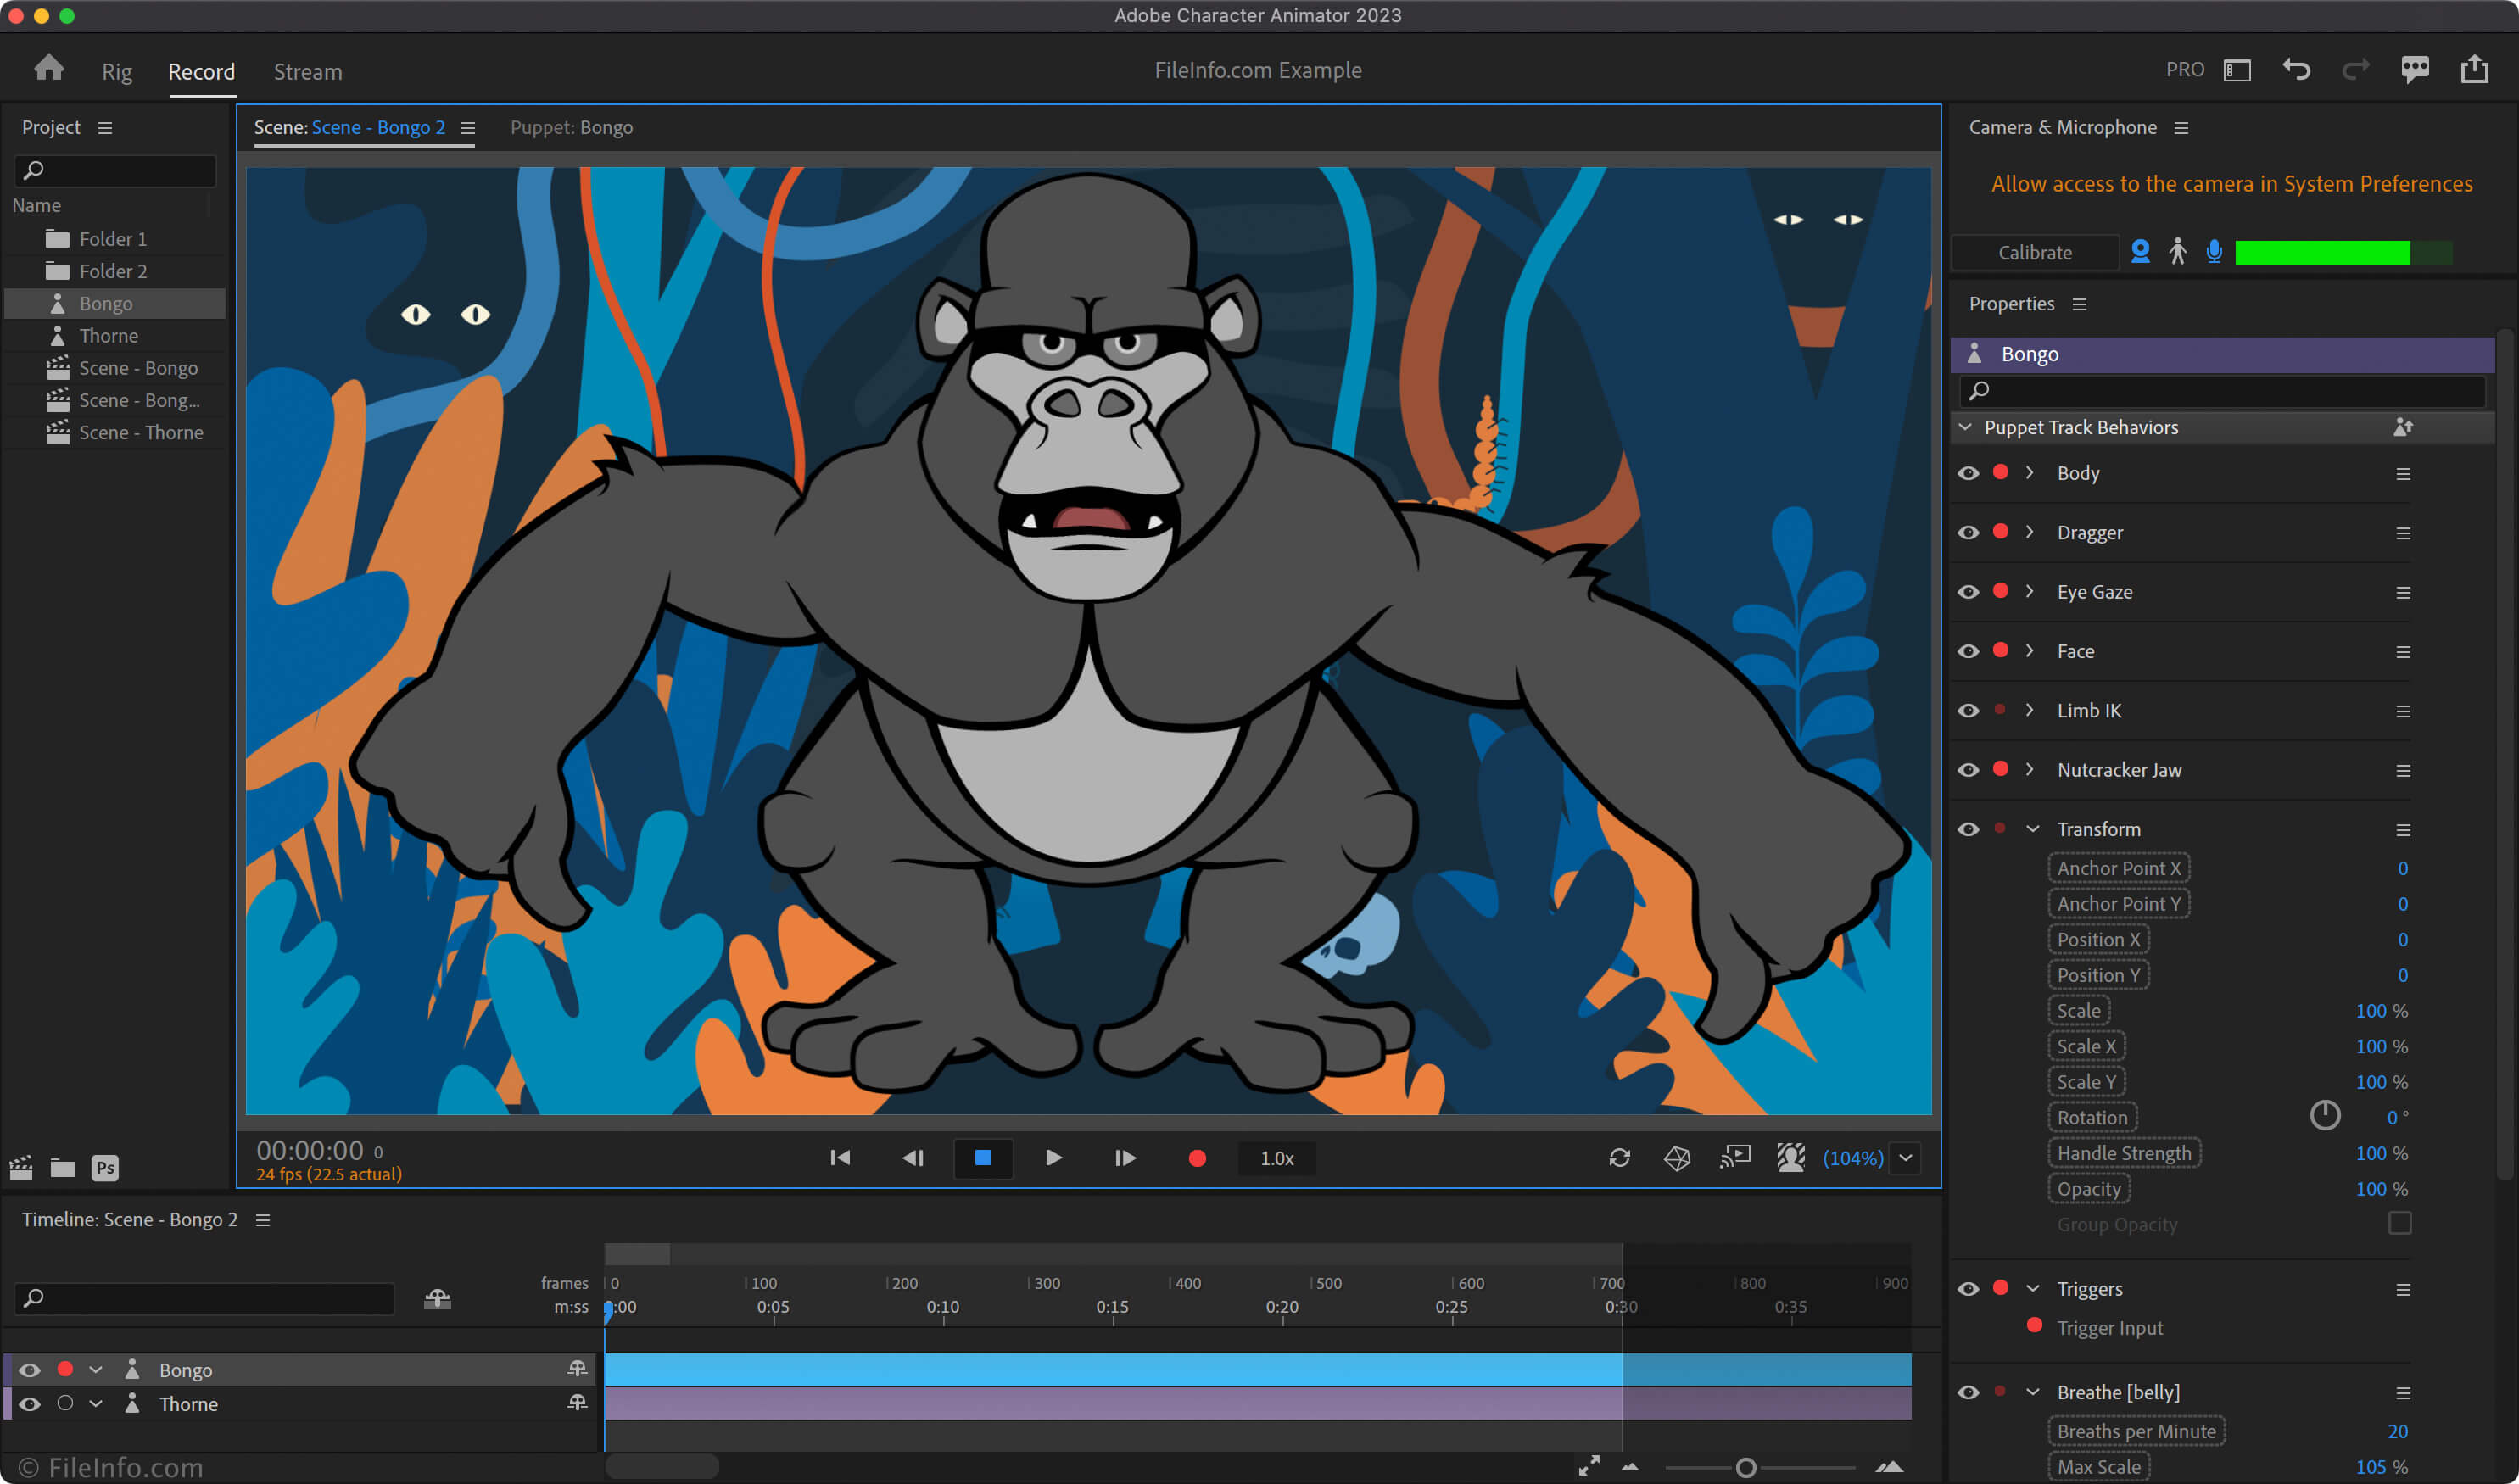 Adobe Character Animator 2023 Overview and Supported File Types